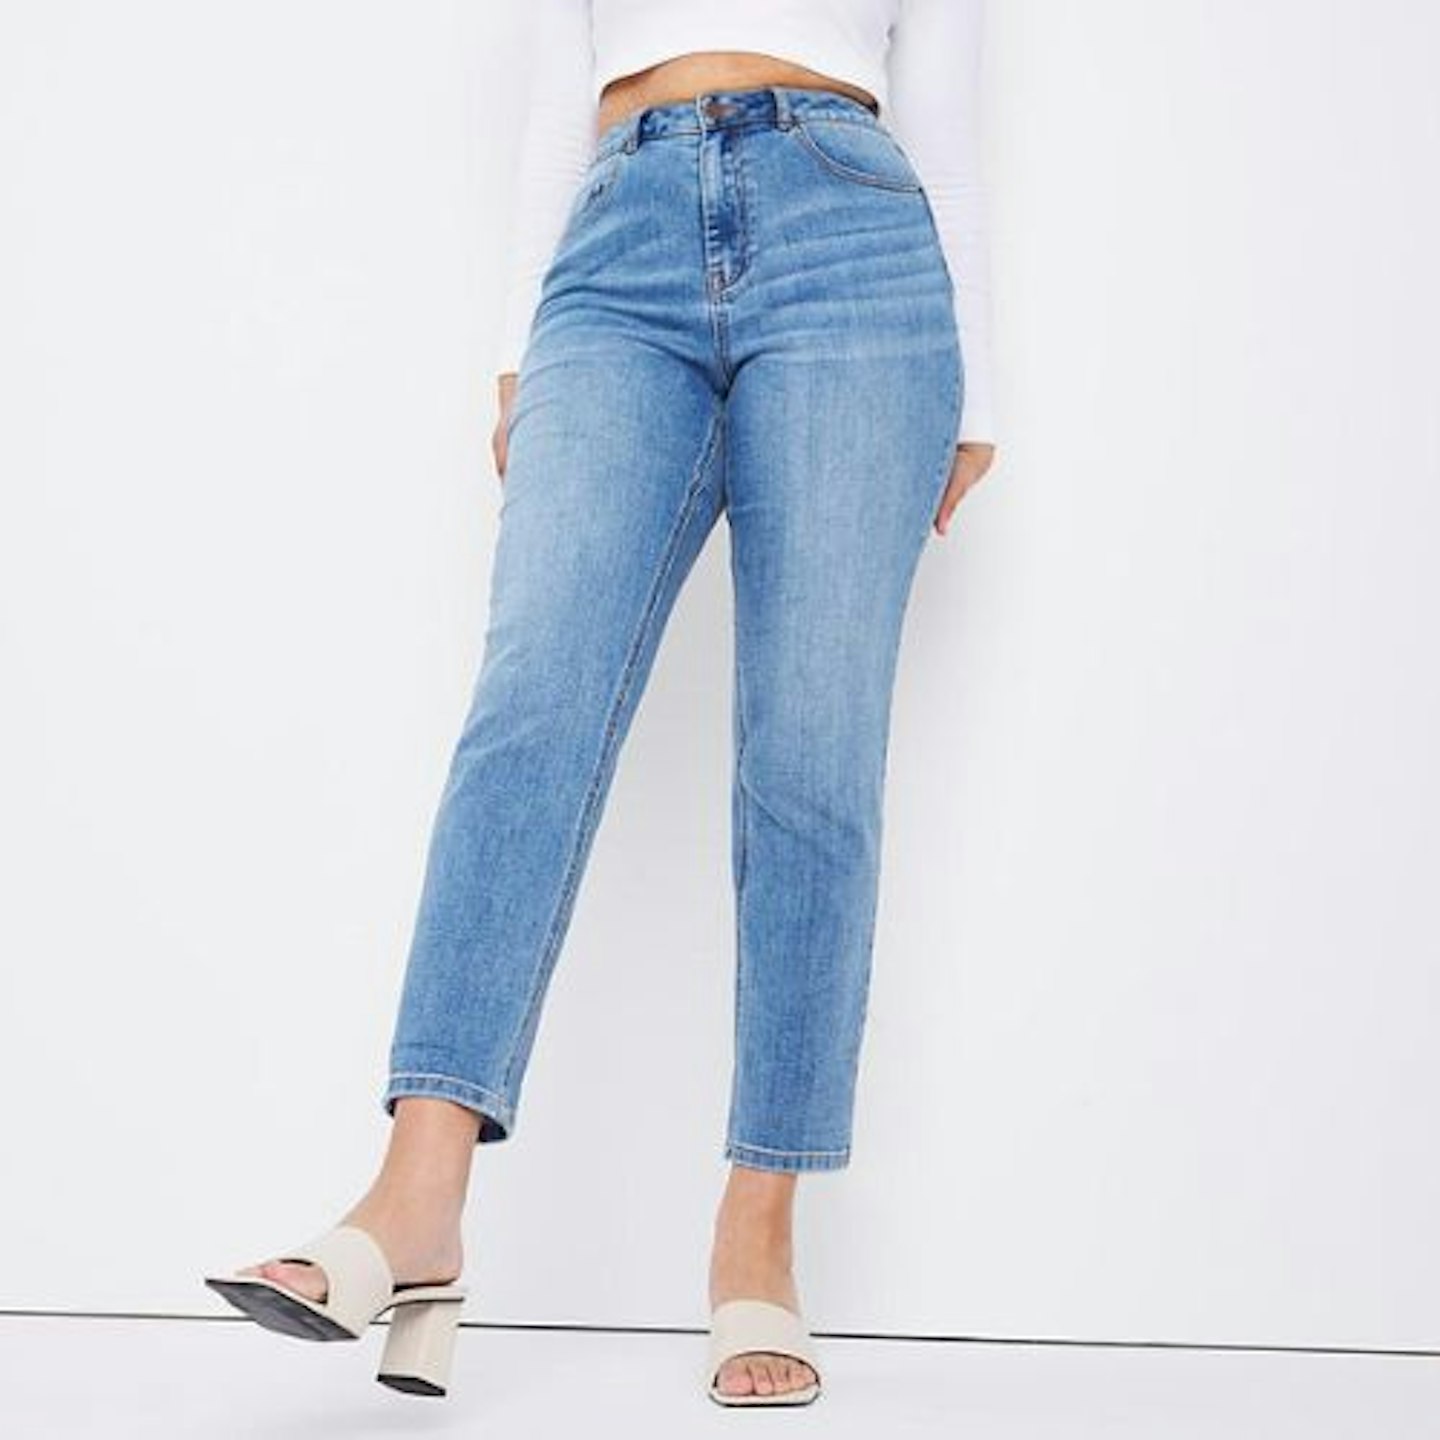 Buy Women's Demi Mom Jeans  Ladies High Waisted Mom Jeans for